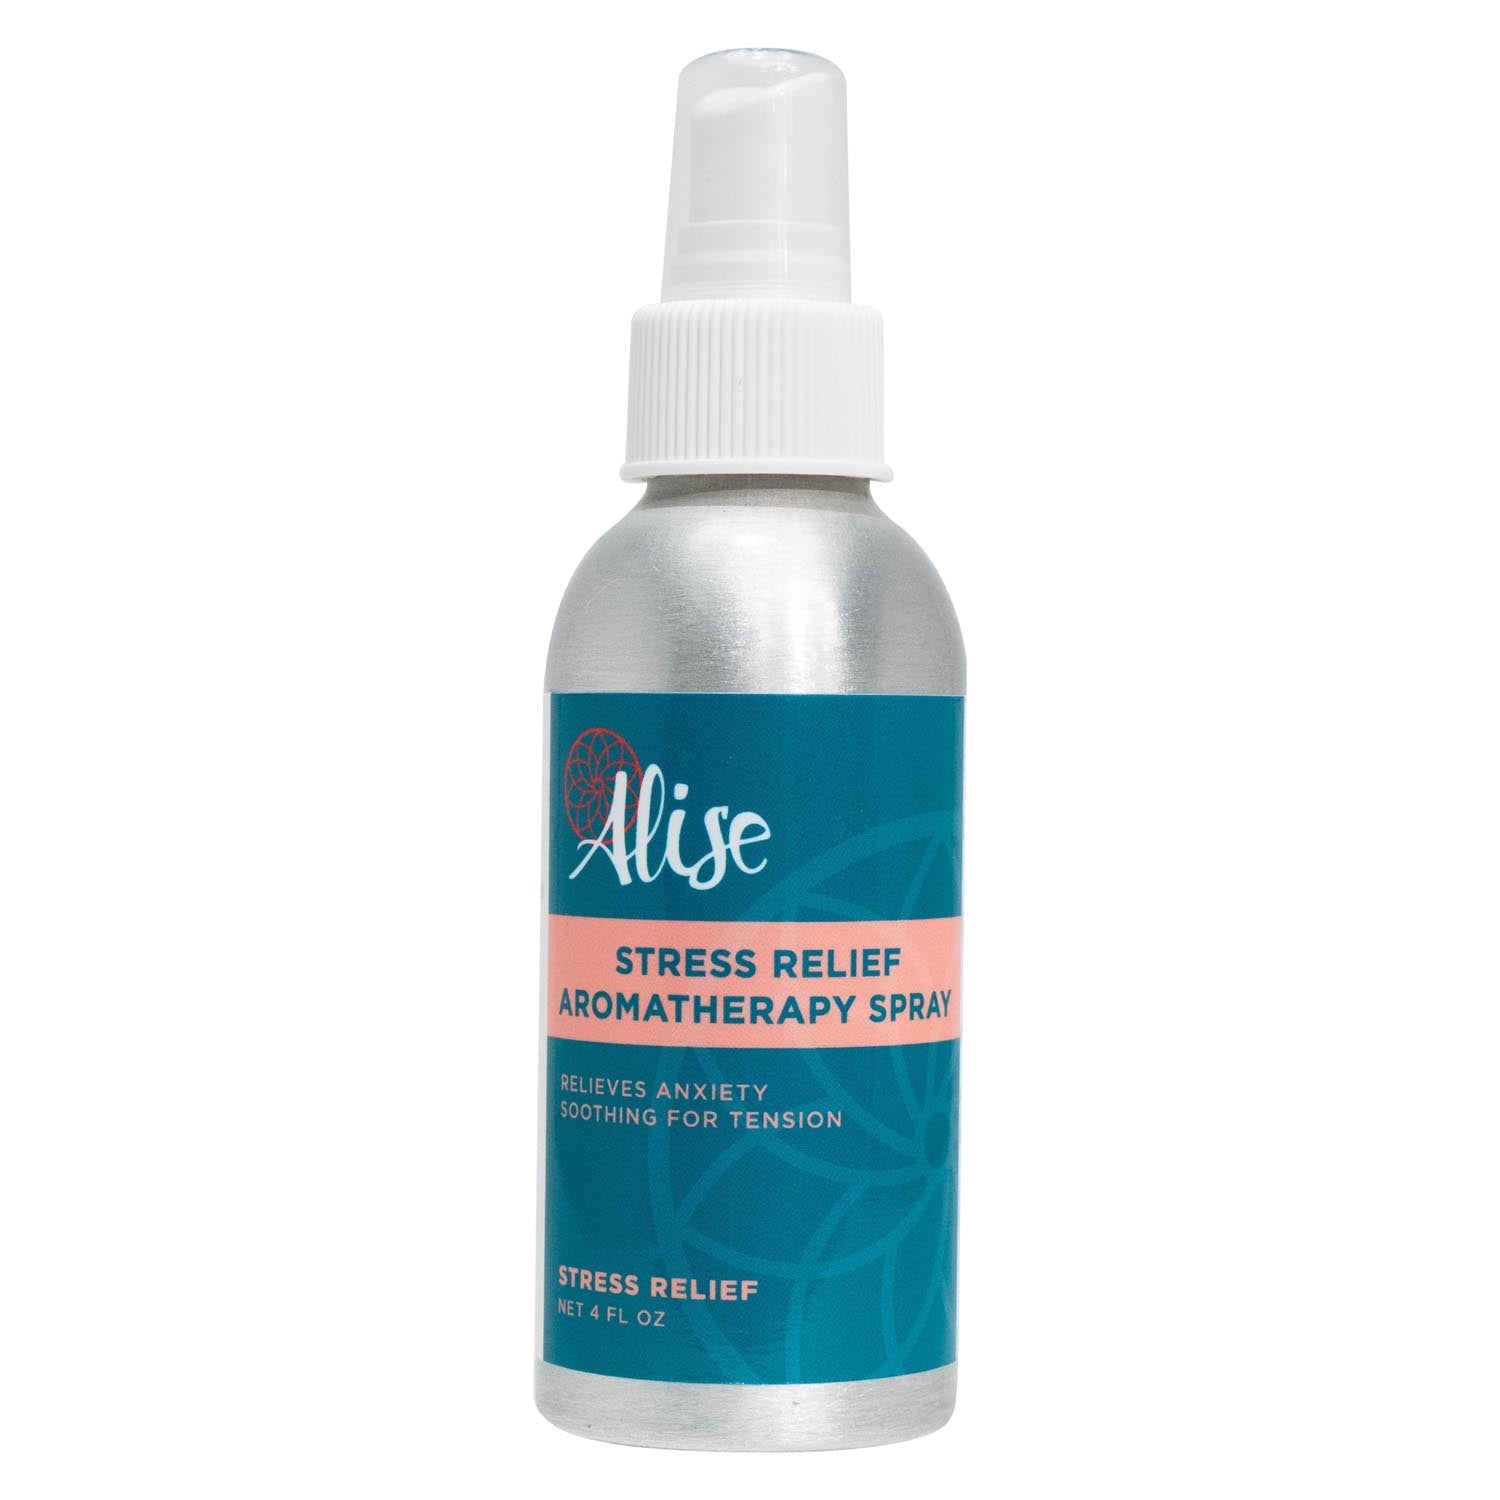 Stress Relief Essentials handcrafted by Alise Body Care